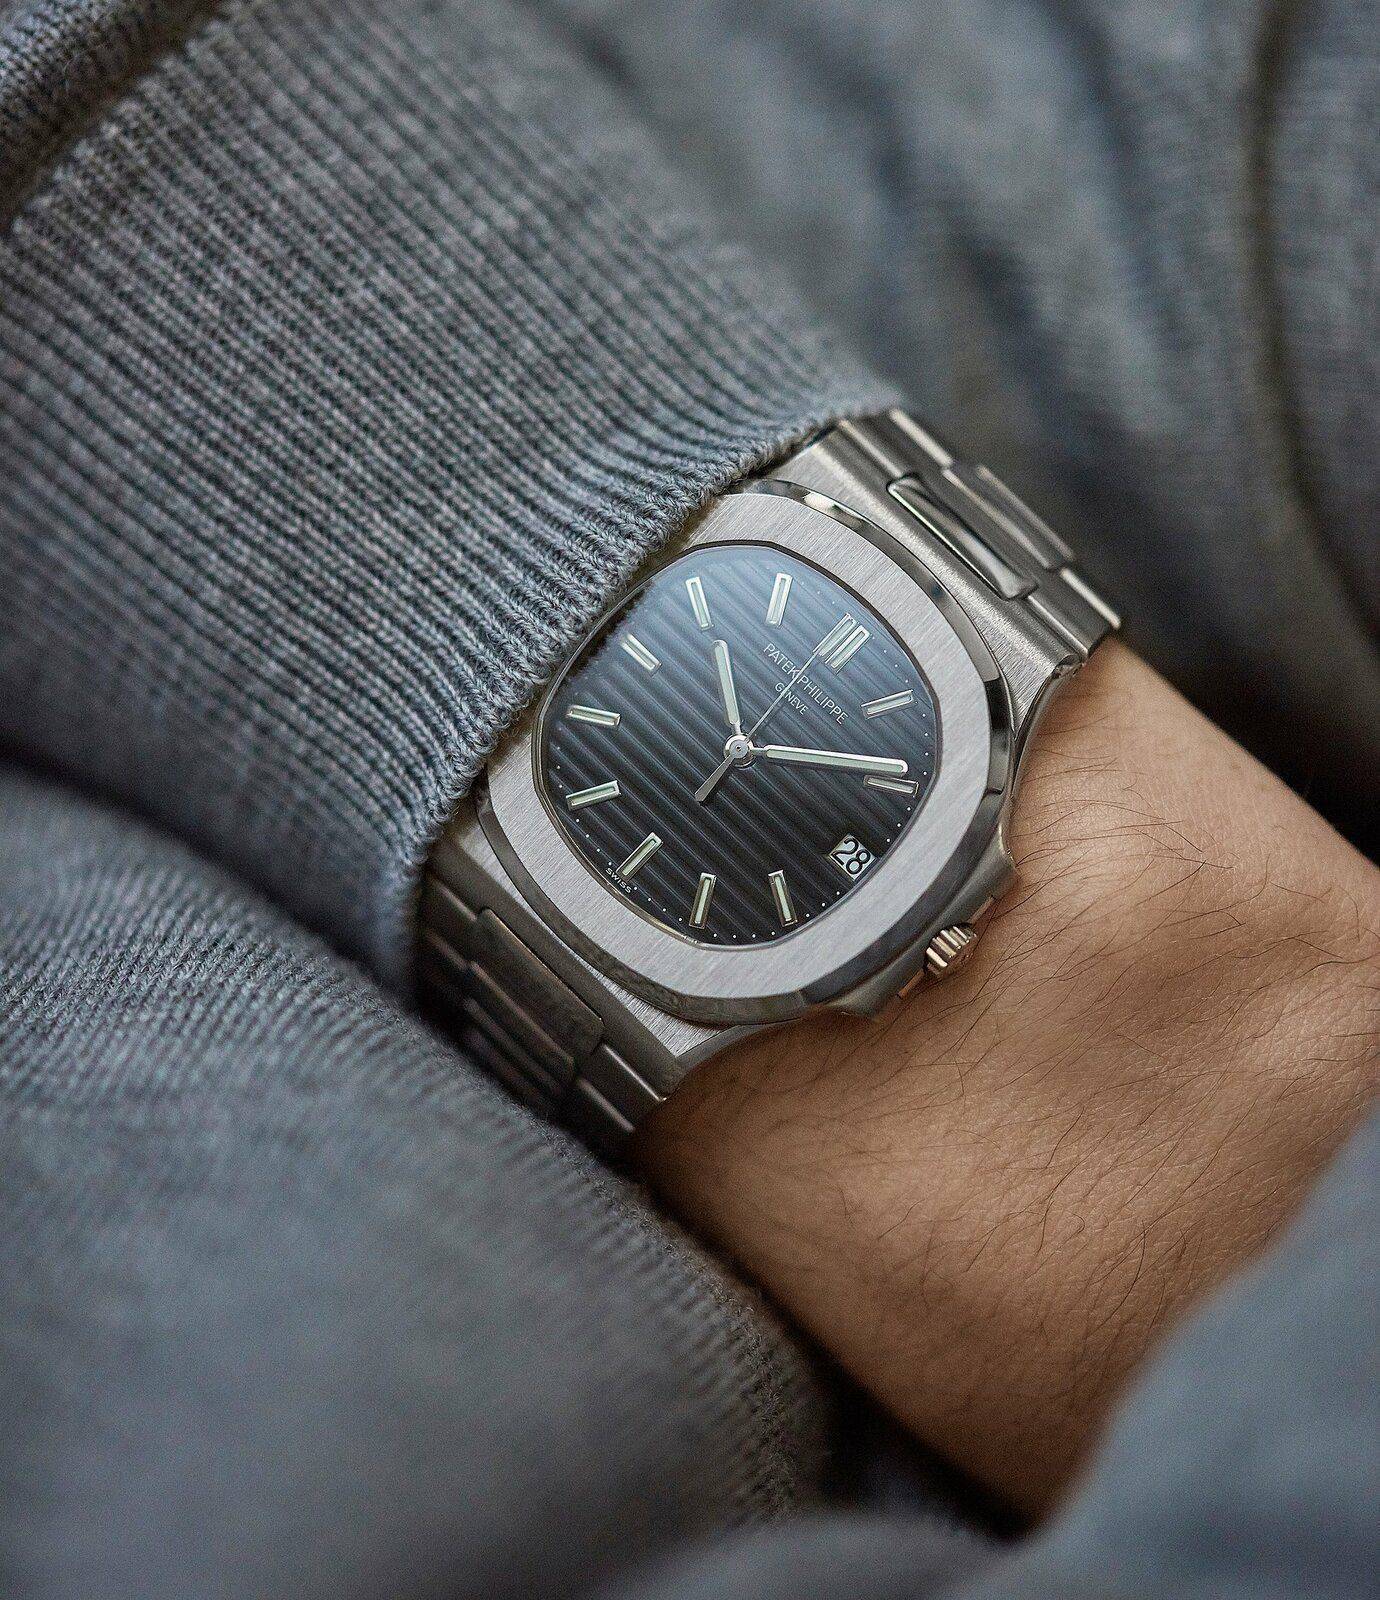 Patek_Philippe_Nautilus_3711_white_gold_watch_at_A_Collected_Man_London6.jpg